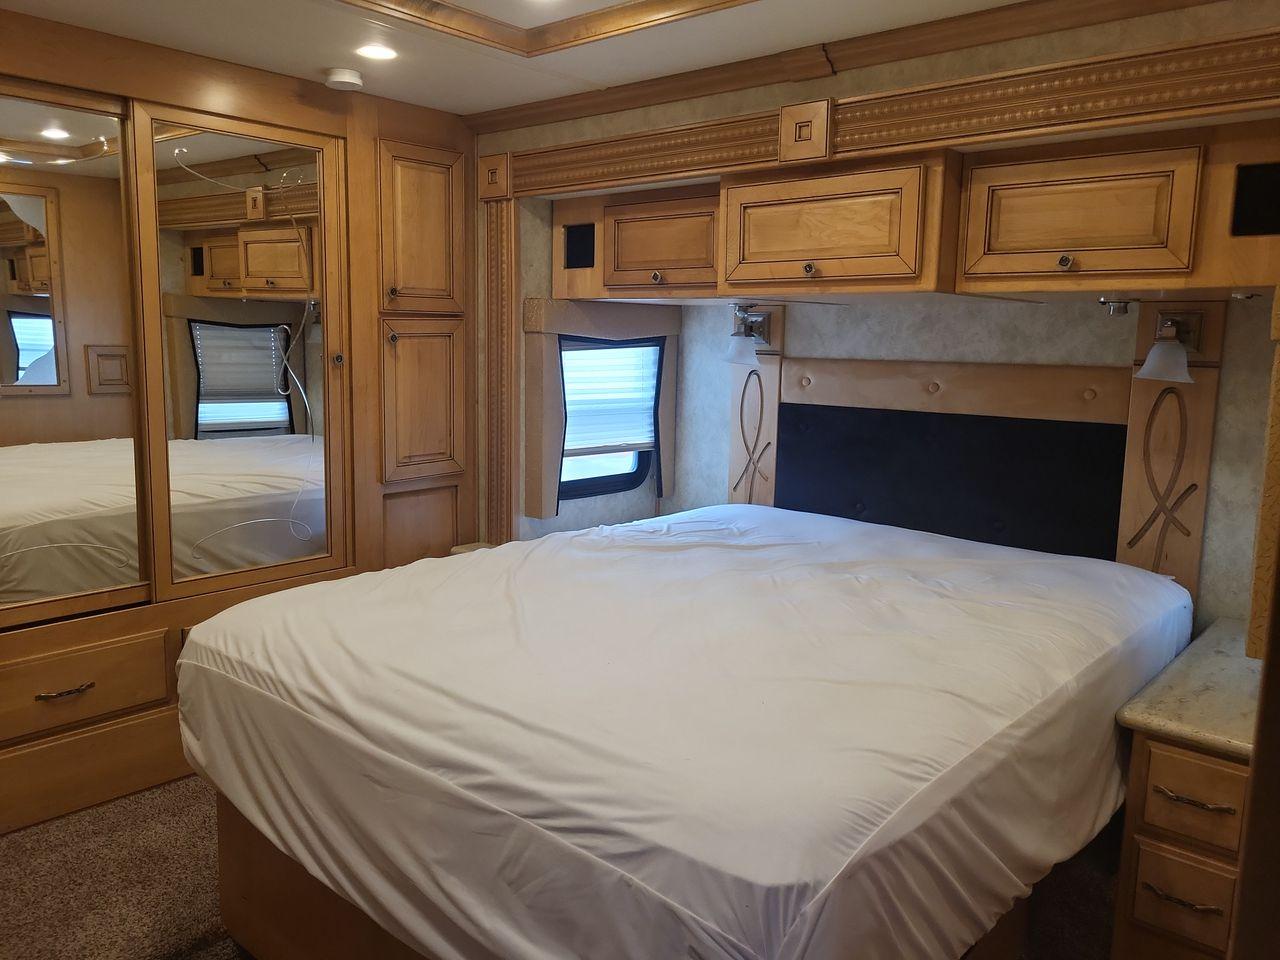 2009 WHITE AMERICAN COACH ALLEGIANCE 40X (4VZBR1D9X9C) , Length: 40.96 ft. | Gross Weight: 34,600 lbs. | Slides: 3 transmission, located at 4319 N Main St, Cleburne, TX, 76033, (817) 678-5133, 32.385960, -97.391212 - Photo #18